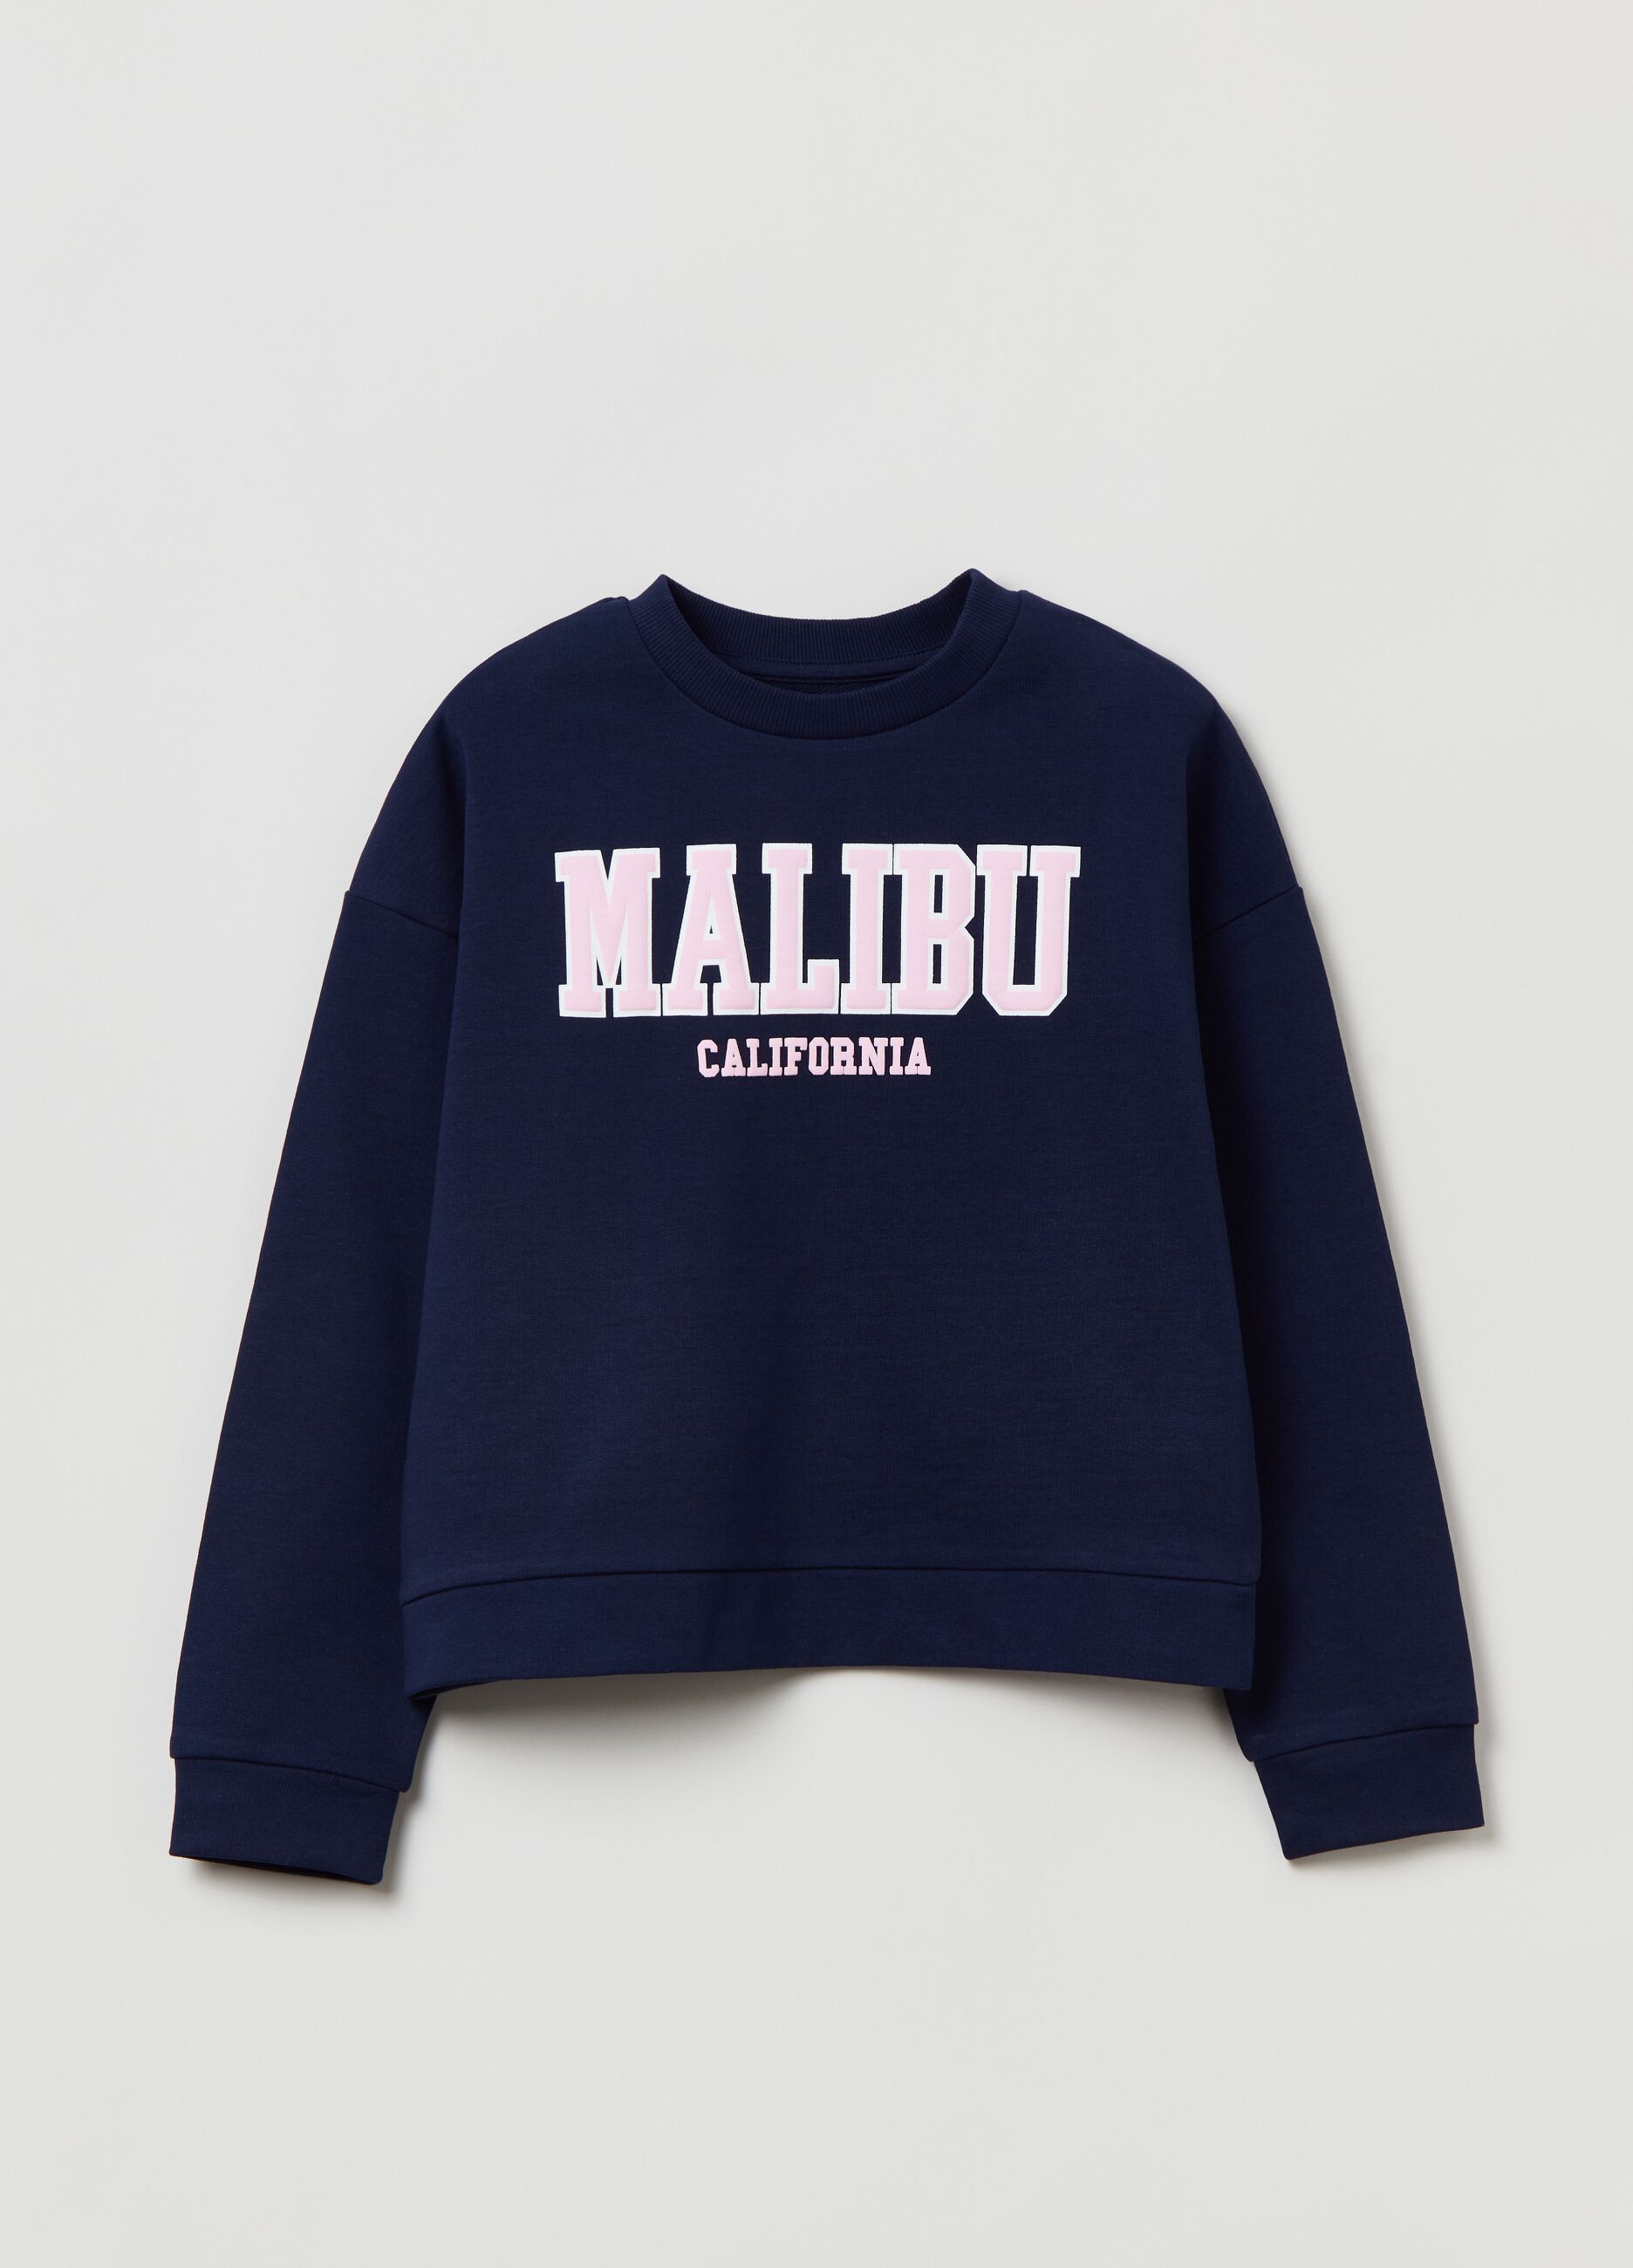 Sweatshirt in cotton with printed lettering